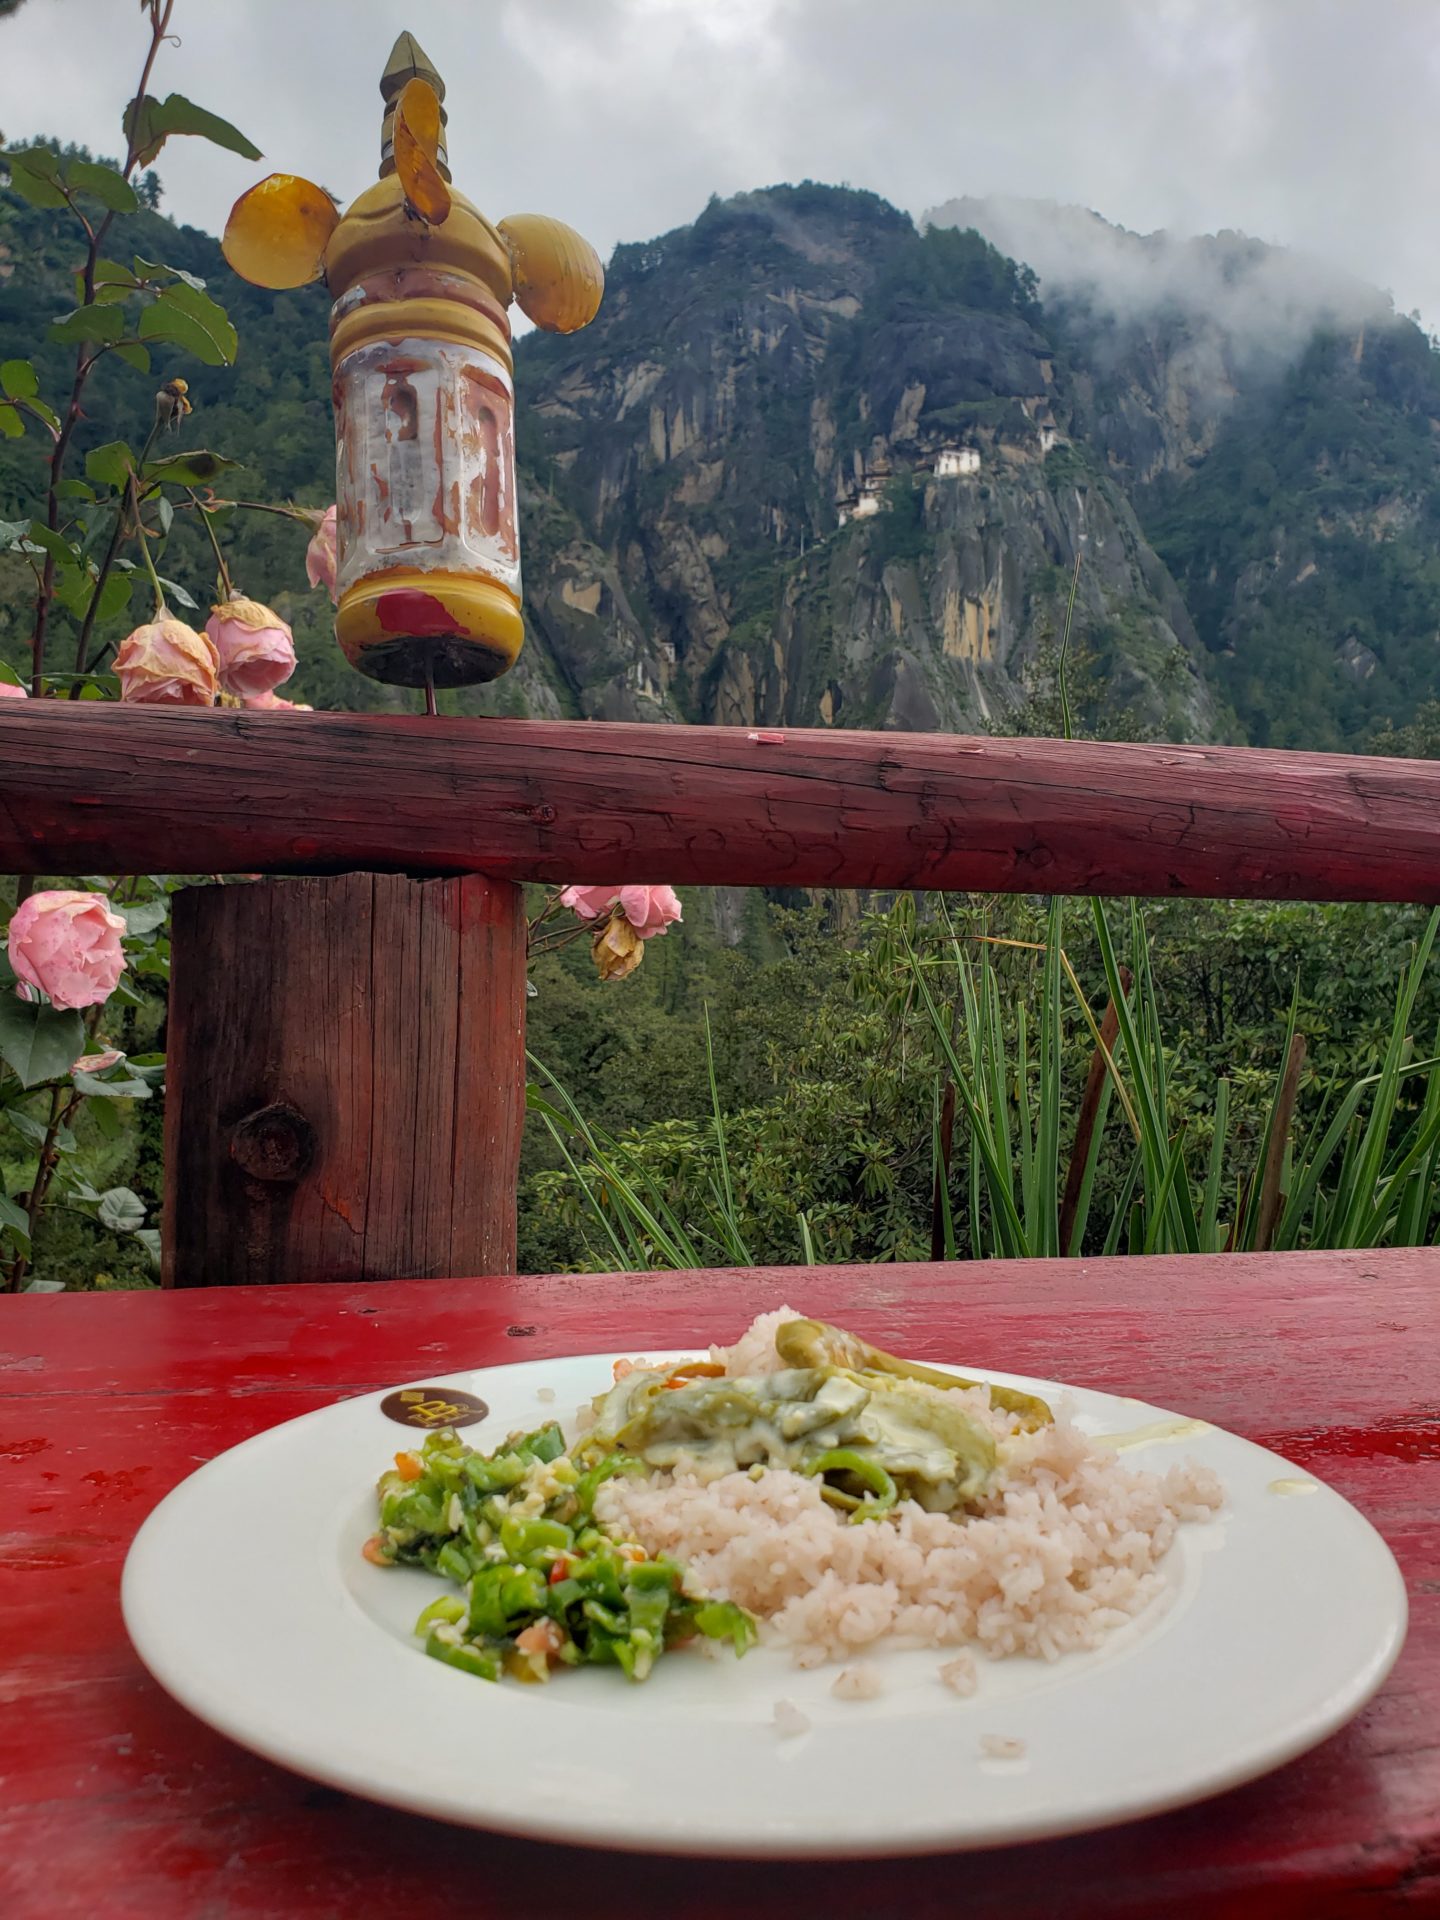 a plate of food on a table with a mountain in the background